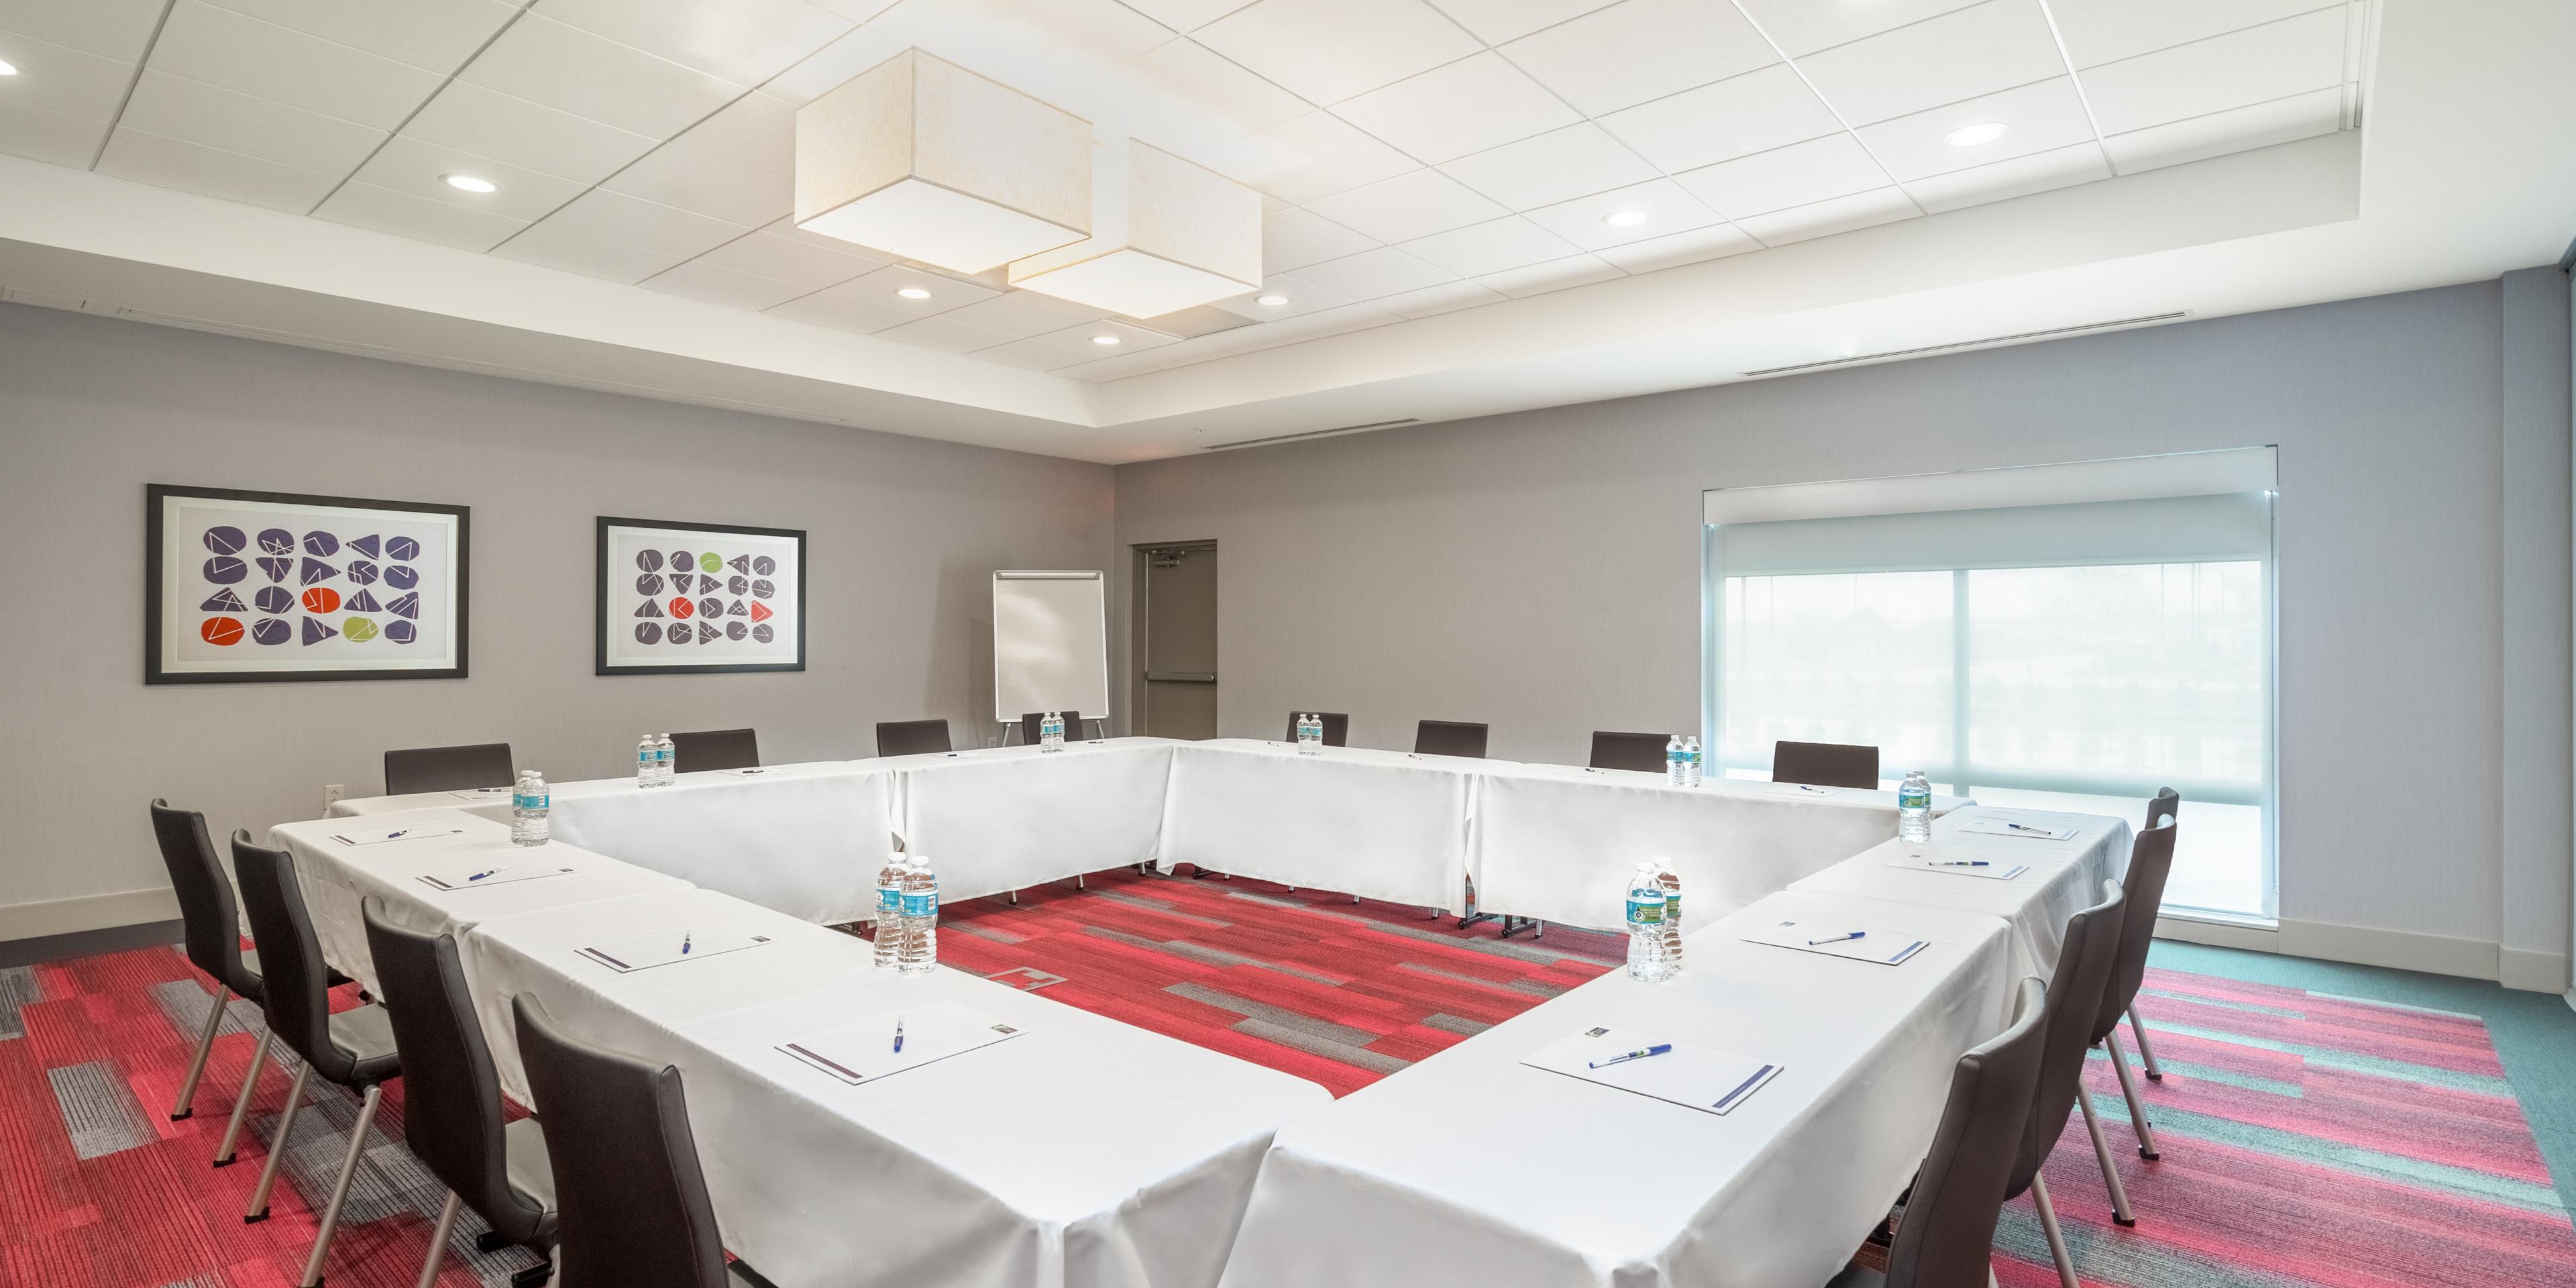 Flexible meeting space to accommodate up to 98 guests.  Ability to select your own caterer or bring in your own food.